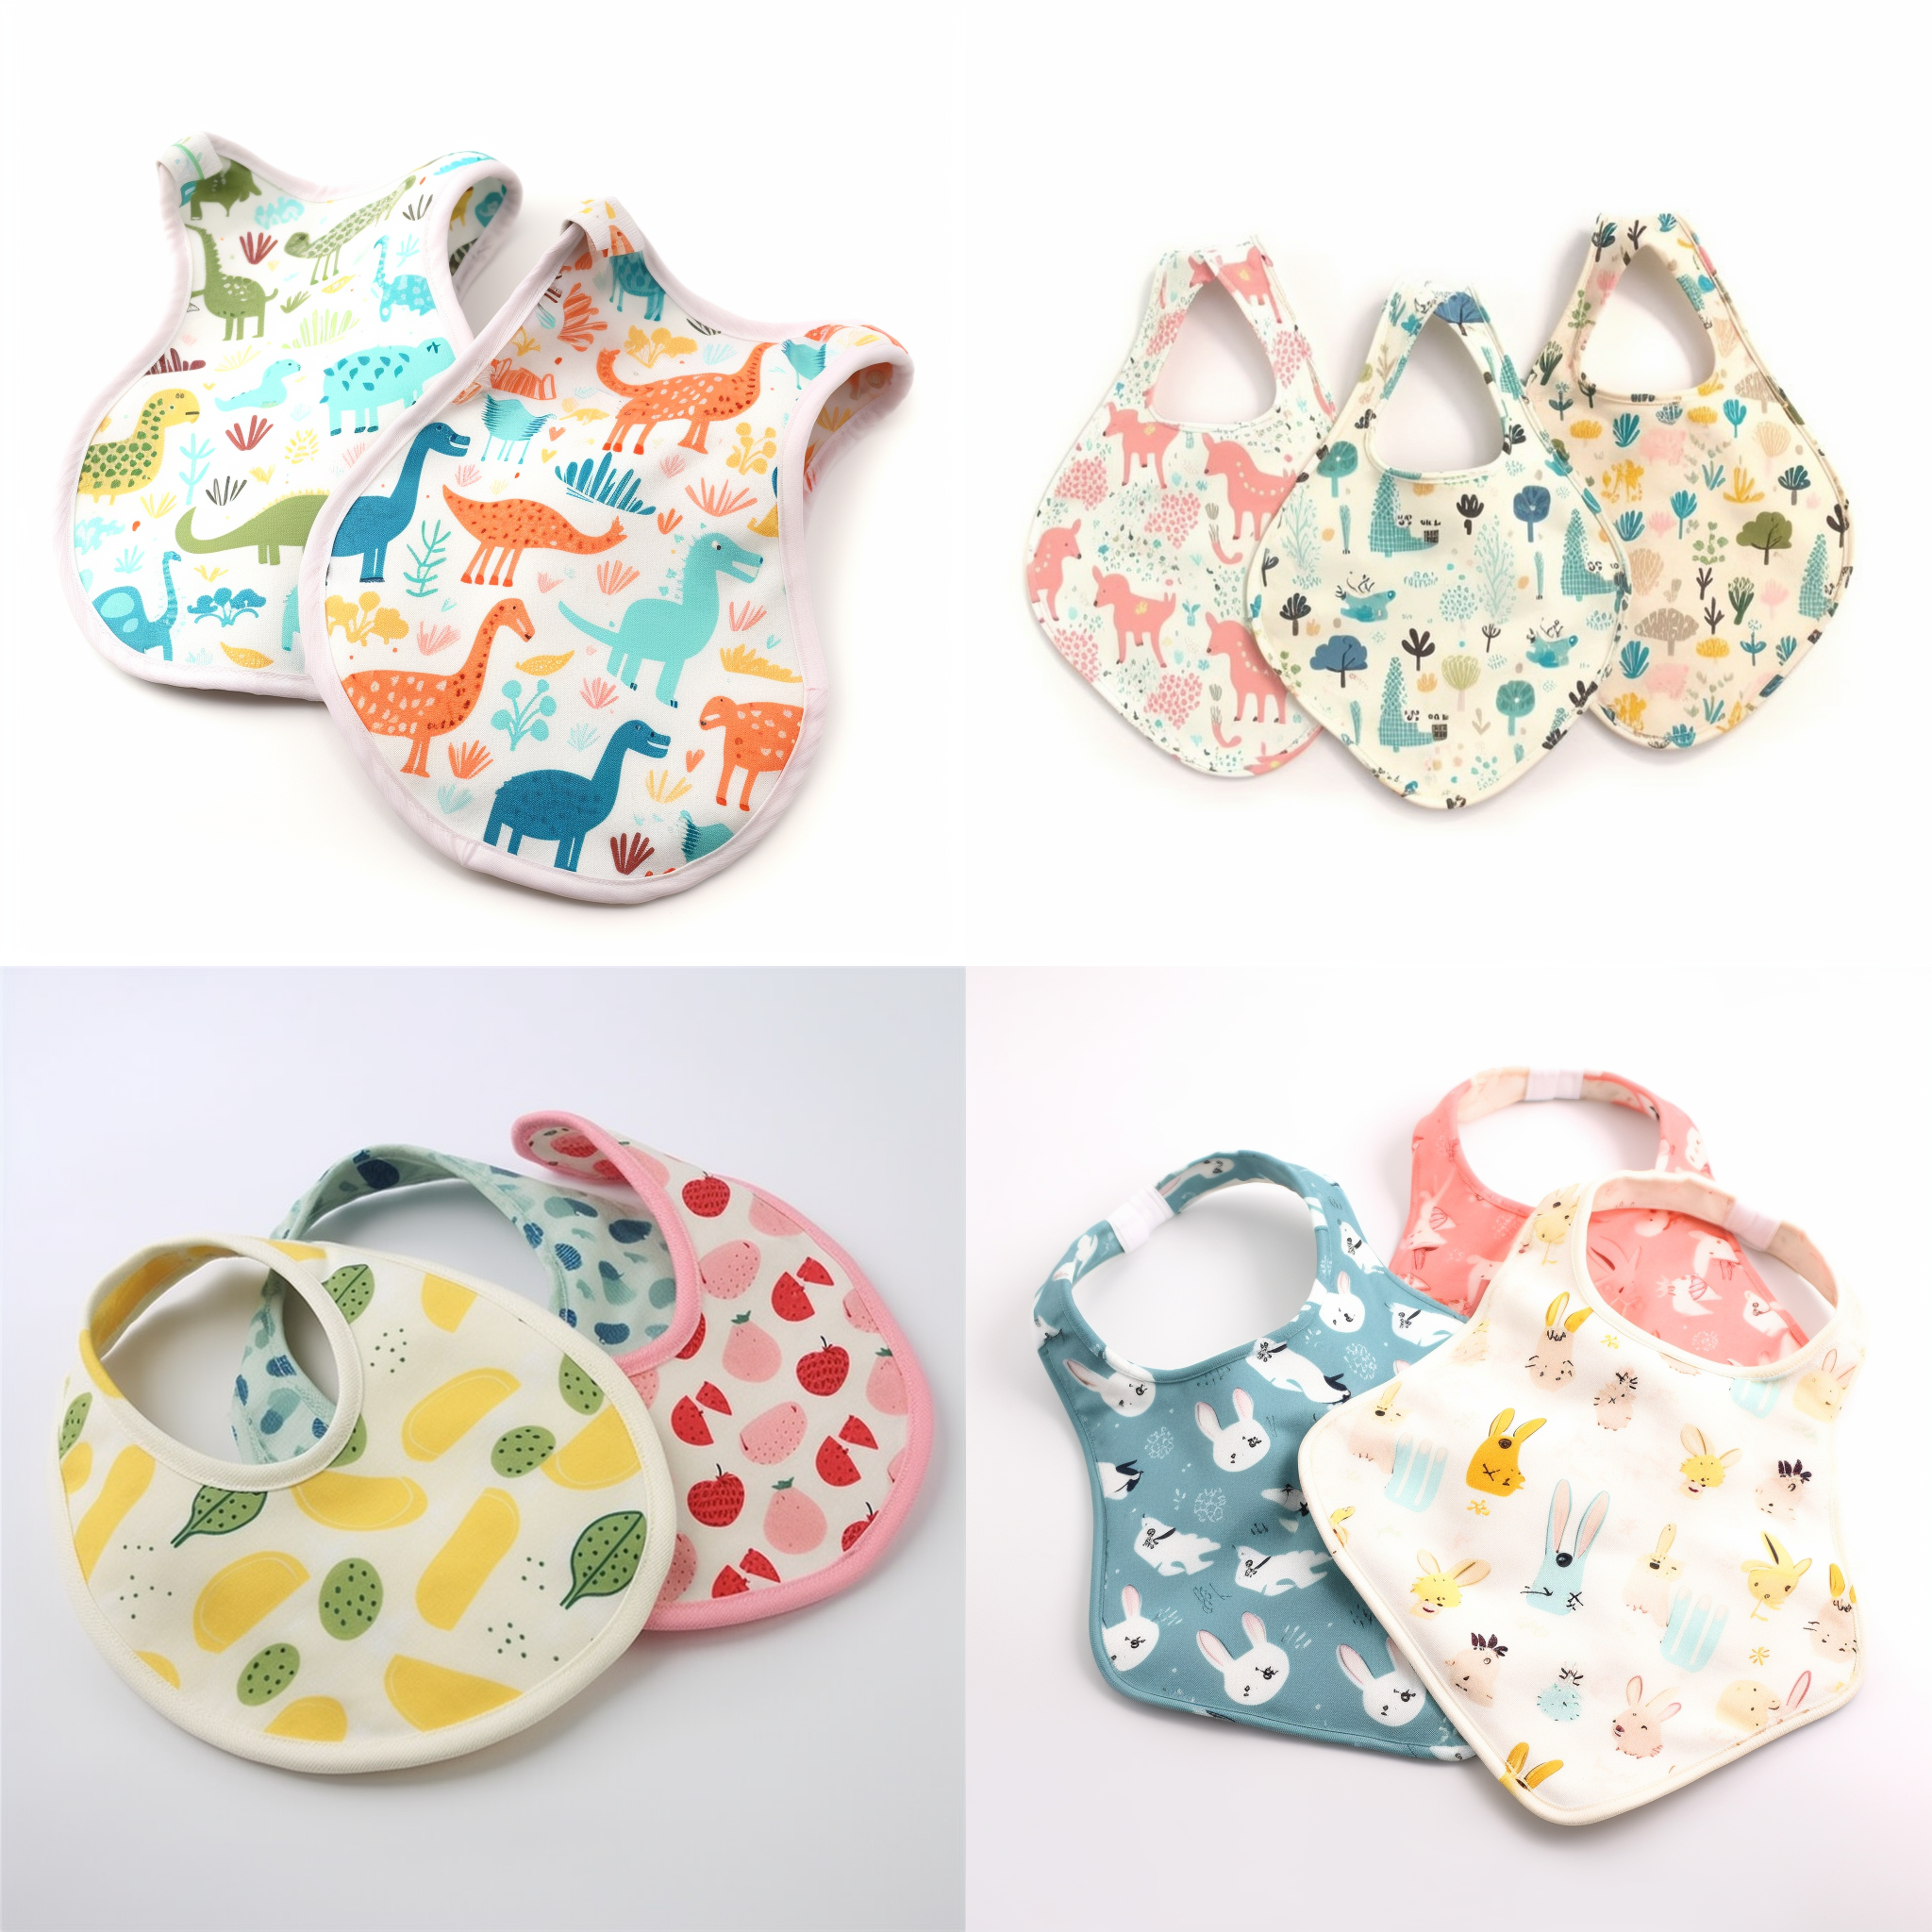 Stylish and Practical: Elevate Your Baby's Look with Adorable Custom Name Baby Bibs